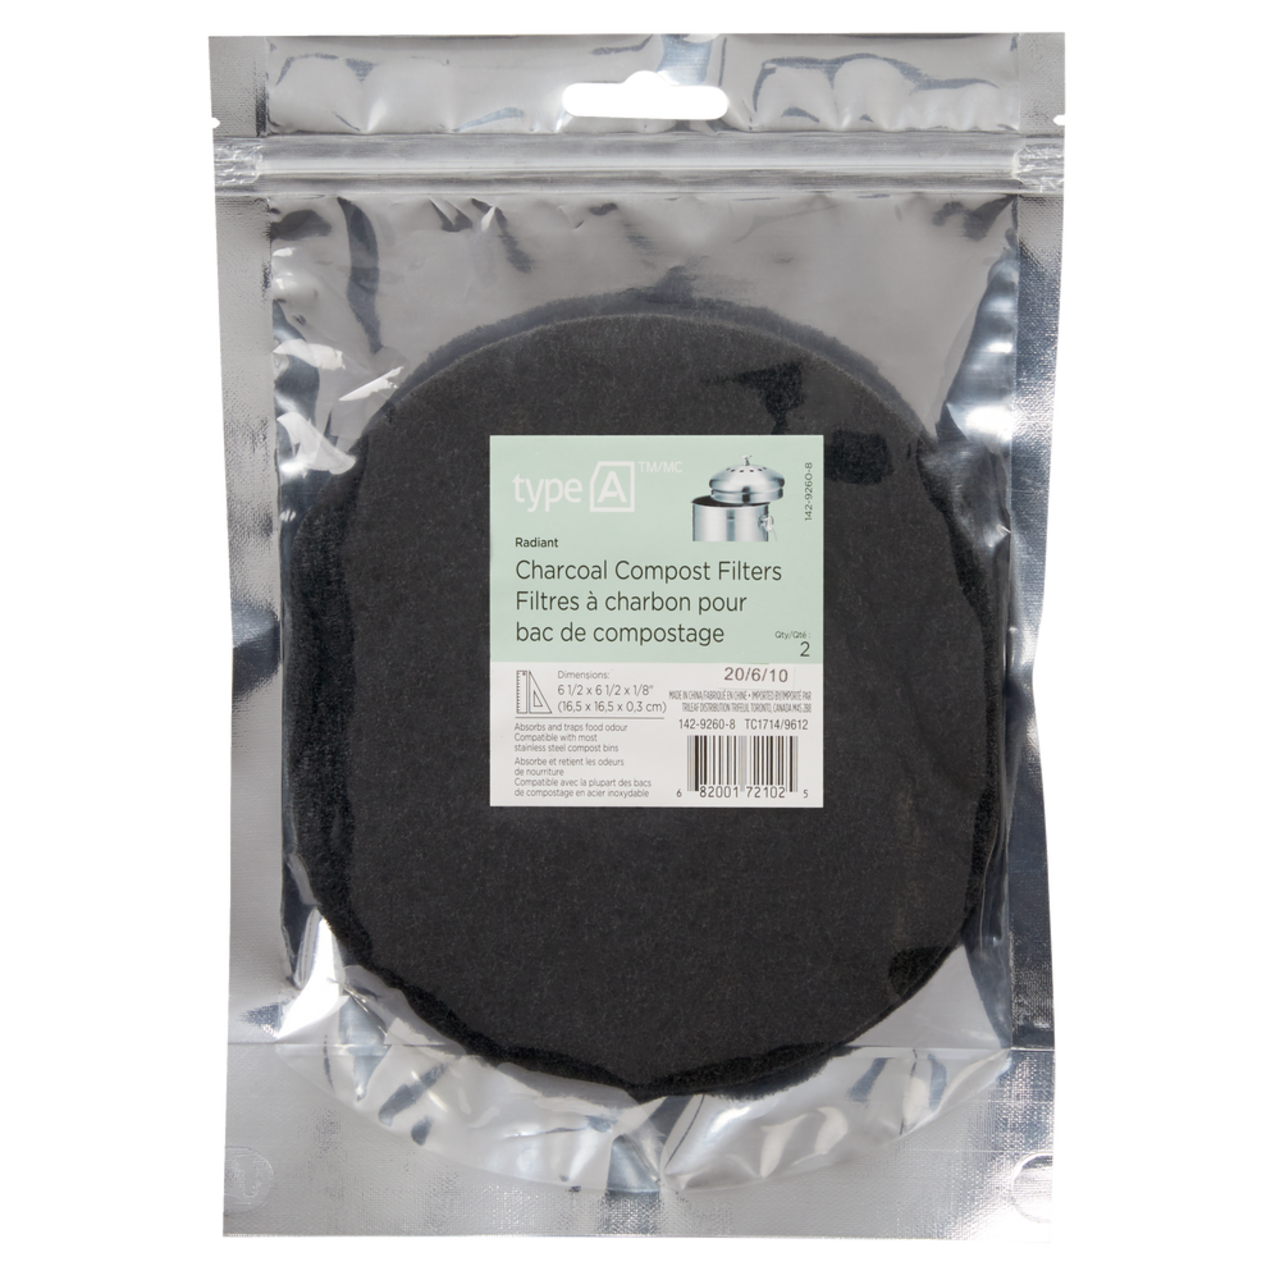 https://media-www.canadiantire.ca/product/living/cleaning/refuse-containers/1429260/type-a-charcoal-filter-2-pack--98b8704b-9cb4-4056-87c5-2de3320392ed.png?imdensity=1&imwidth=640&impolicy=mZoom